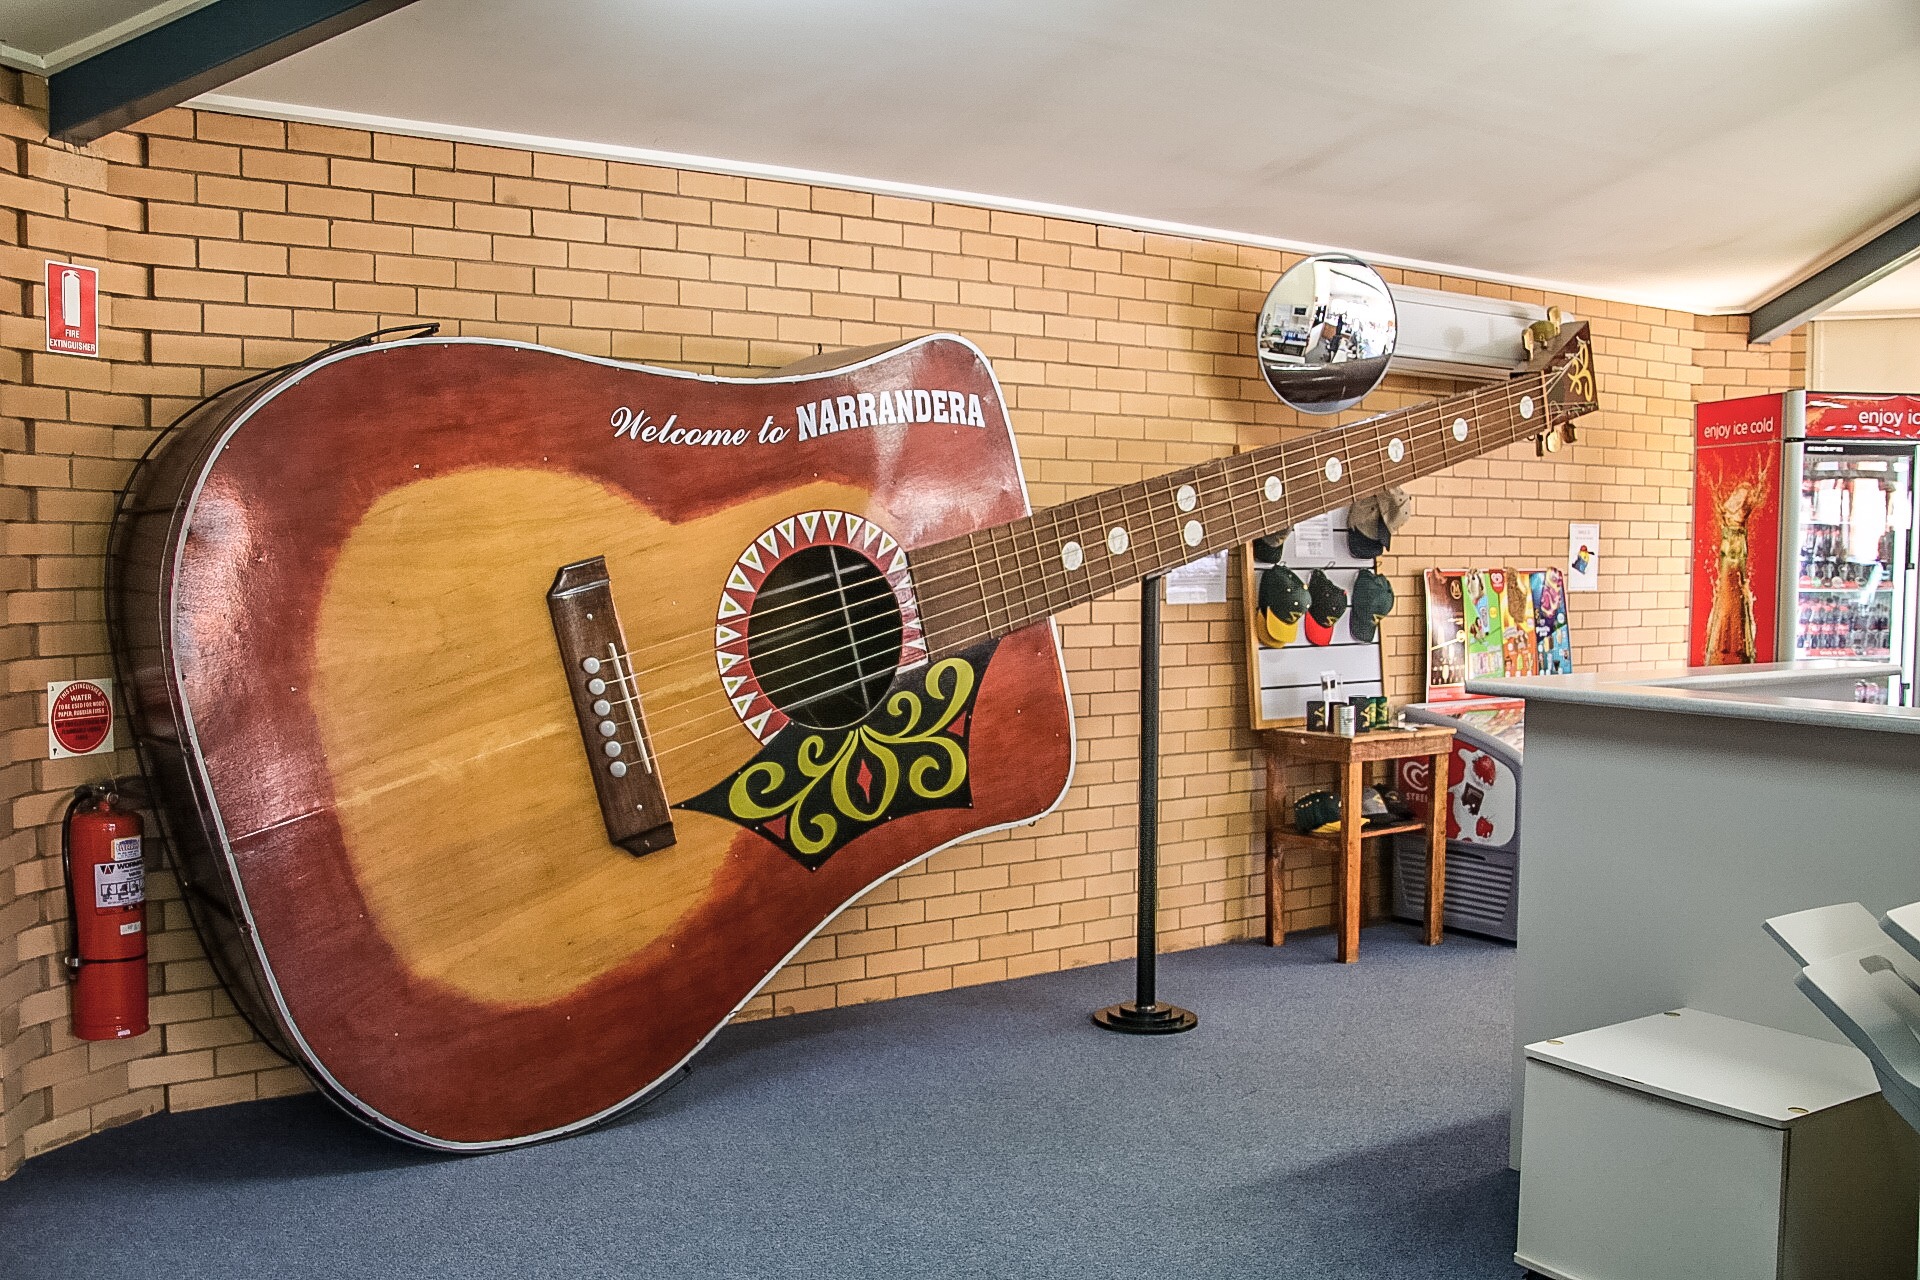 World's largest playable guitar